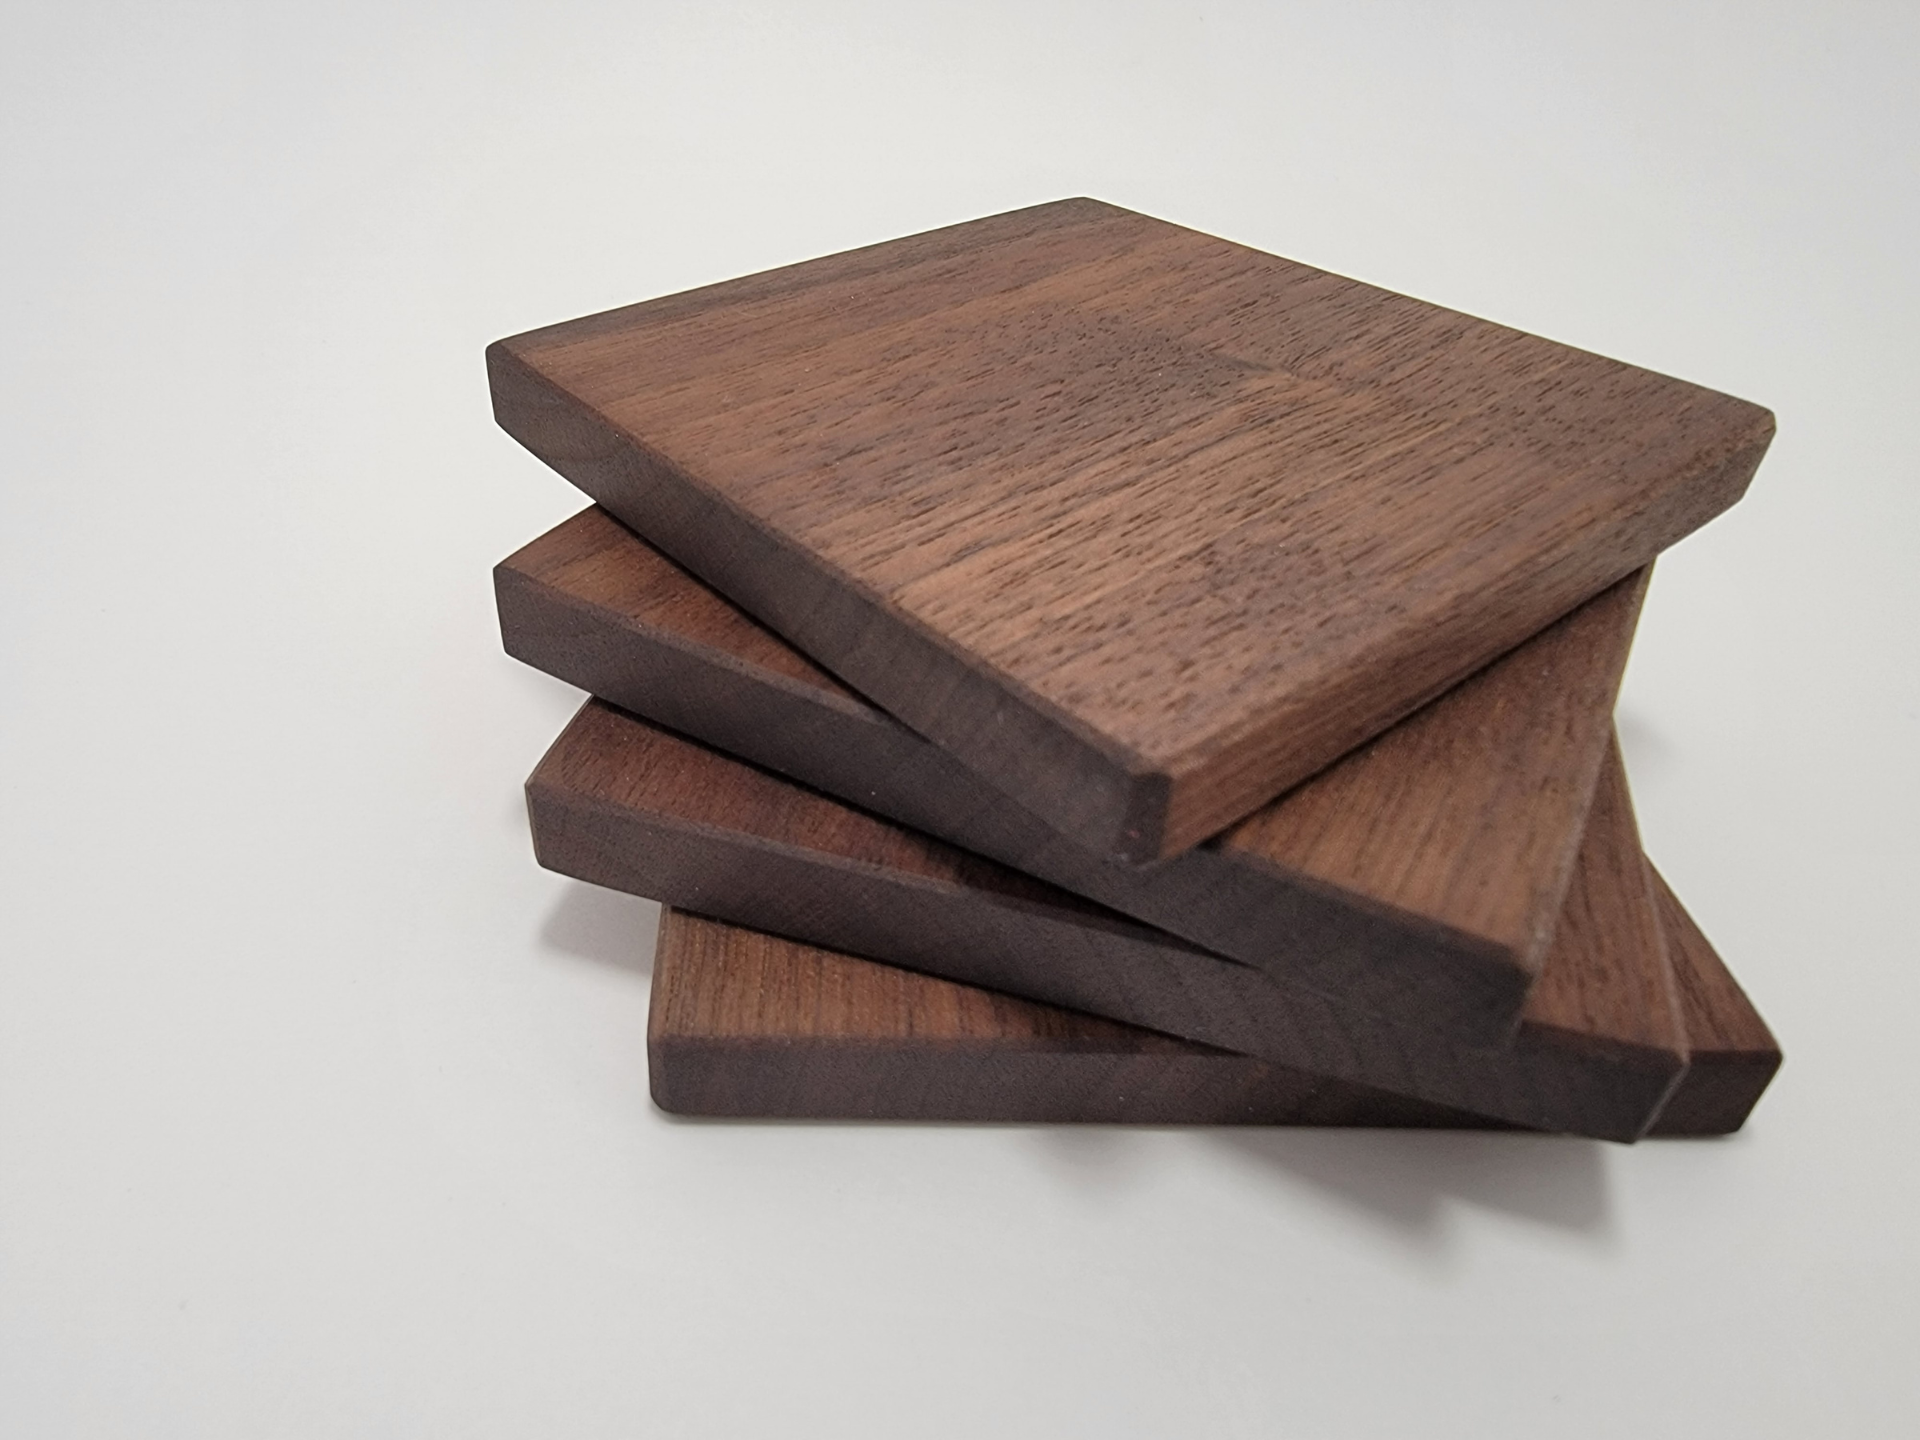 Black Walnut Drink Square Coasters, 1 Pcs Wood Coasters Set, 100% Natural  and Organic Dinner Decor Centerpiece for Home Office Table(Groove) 